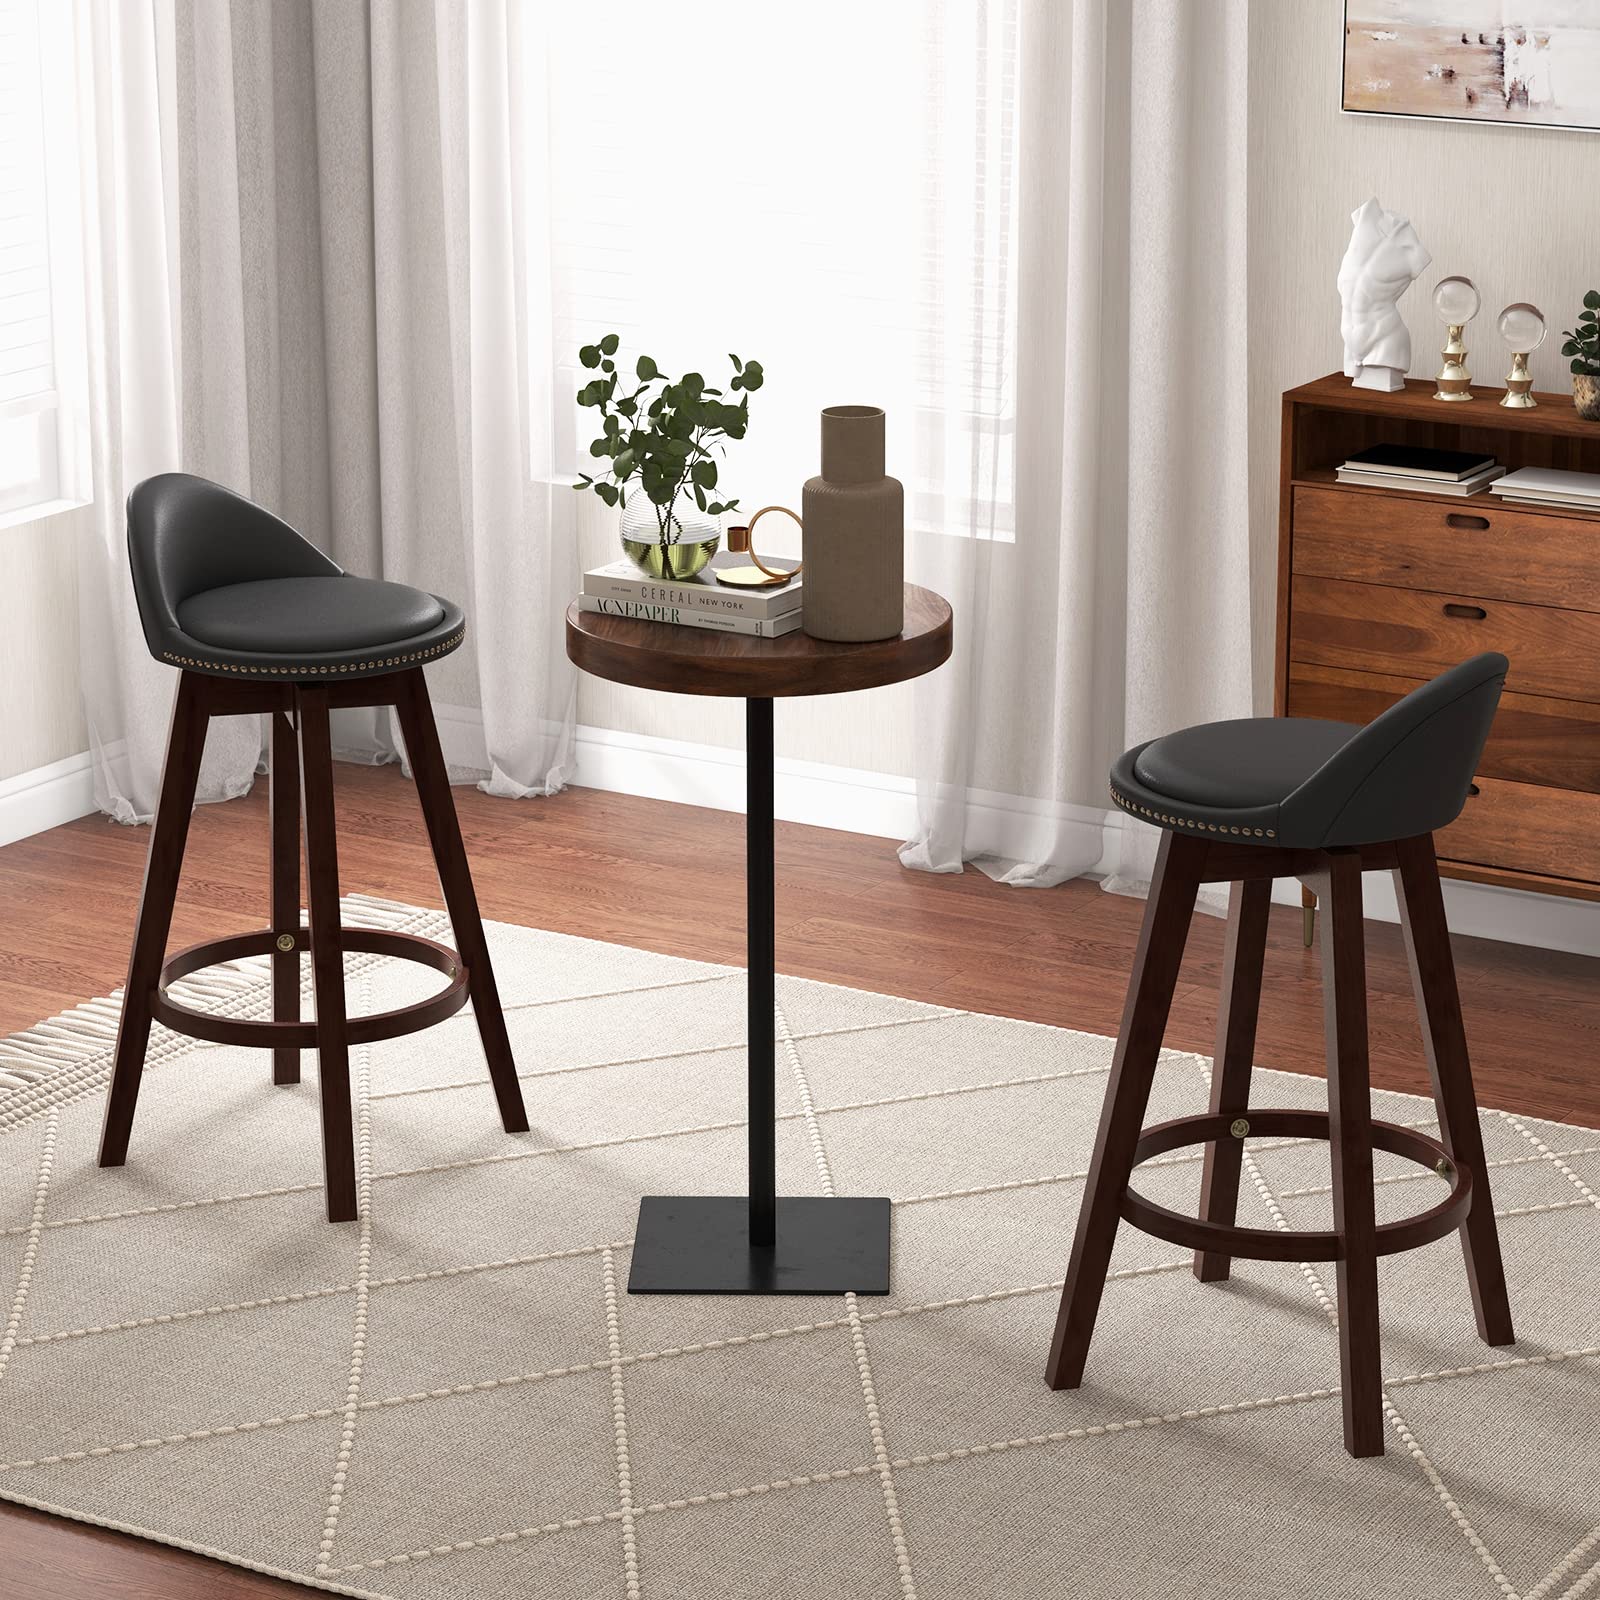 Giantex Swivel Bar Stools Set of 2, 34.5 in Counter Height Stools with PVC Leather Cover, Rubber Wood Legs